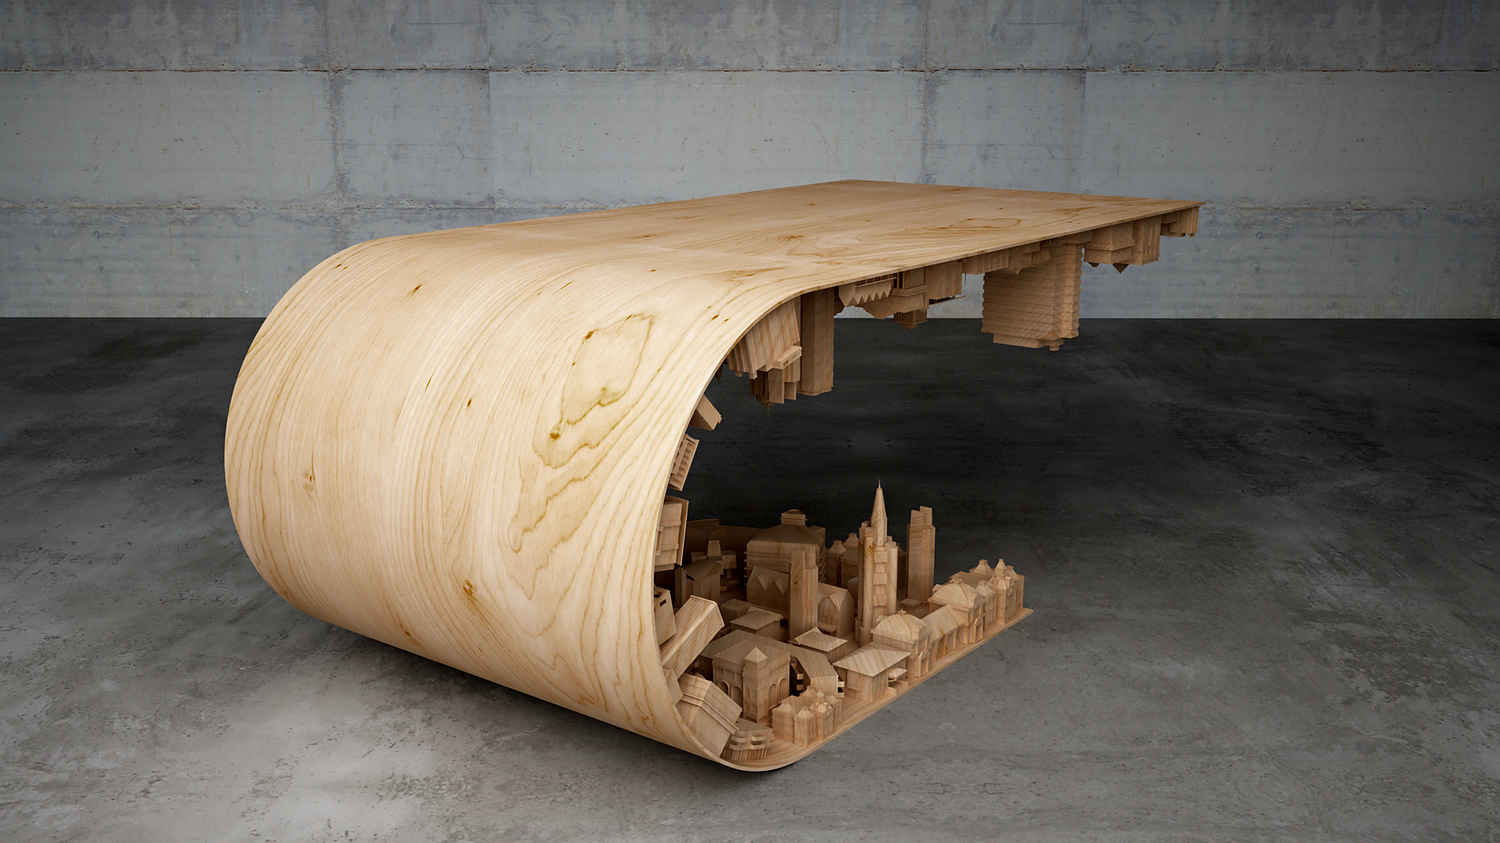 Stelios Mousarris, “Wave City Coffee Table”